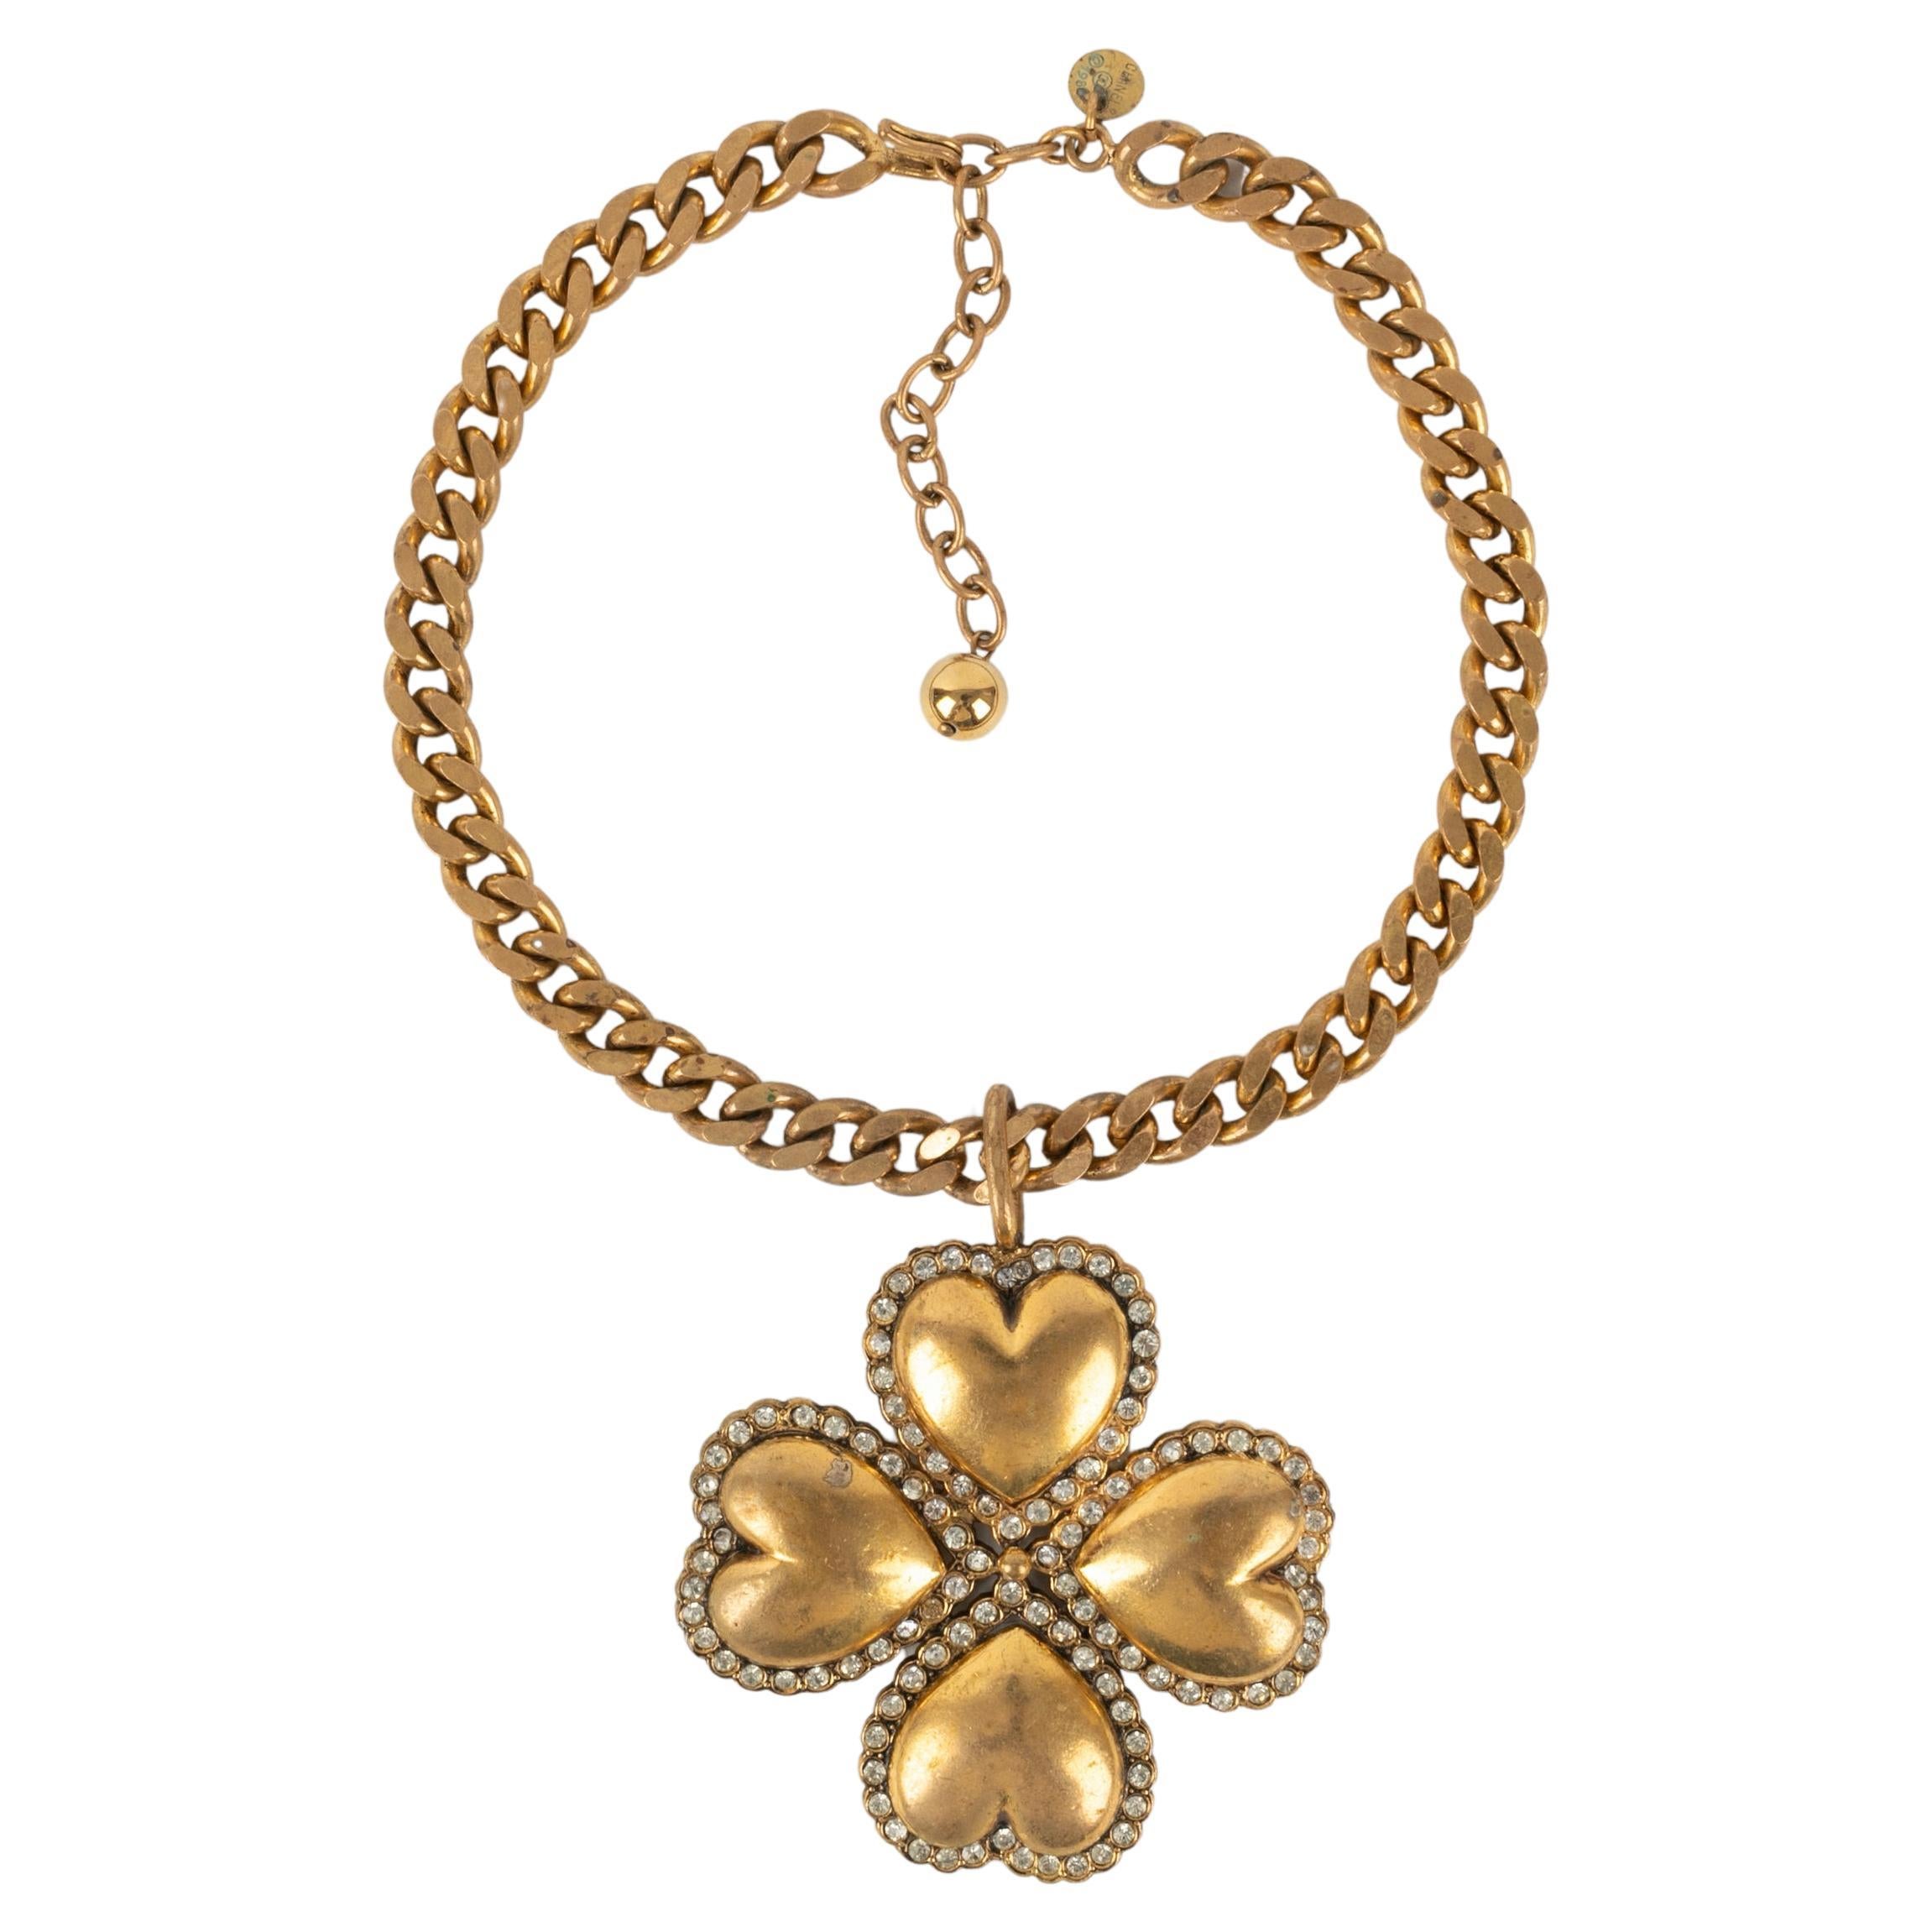 Chanel Golden Metal Necklace with a Four-leaf Clover-shaped Pendant, 1980s For Sale